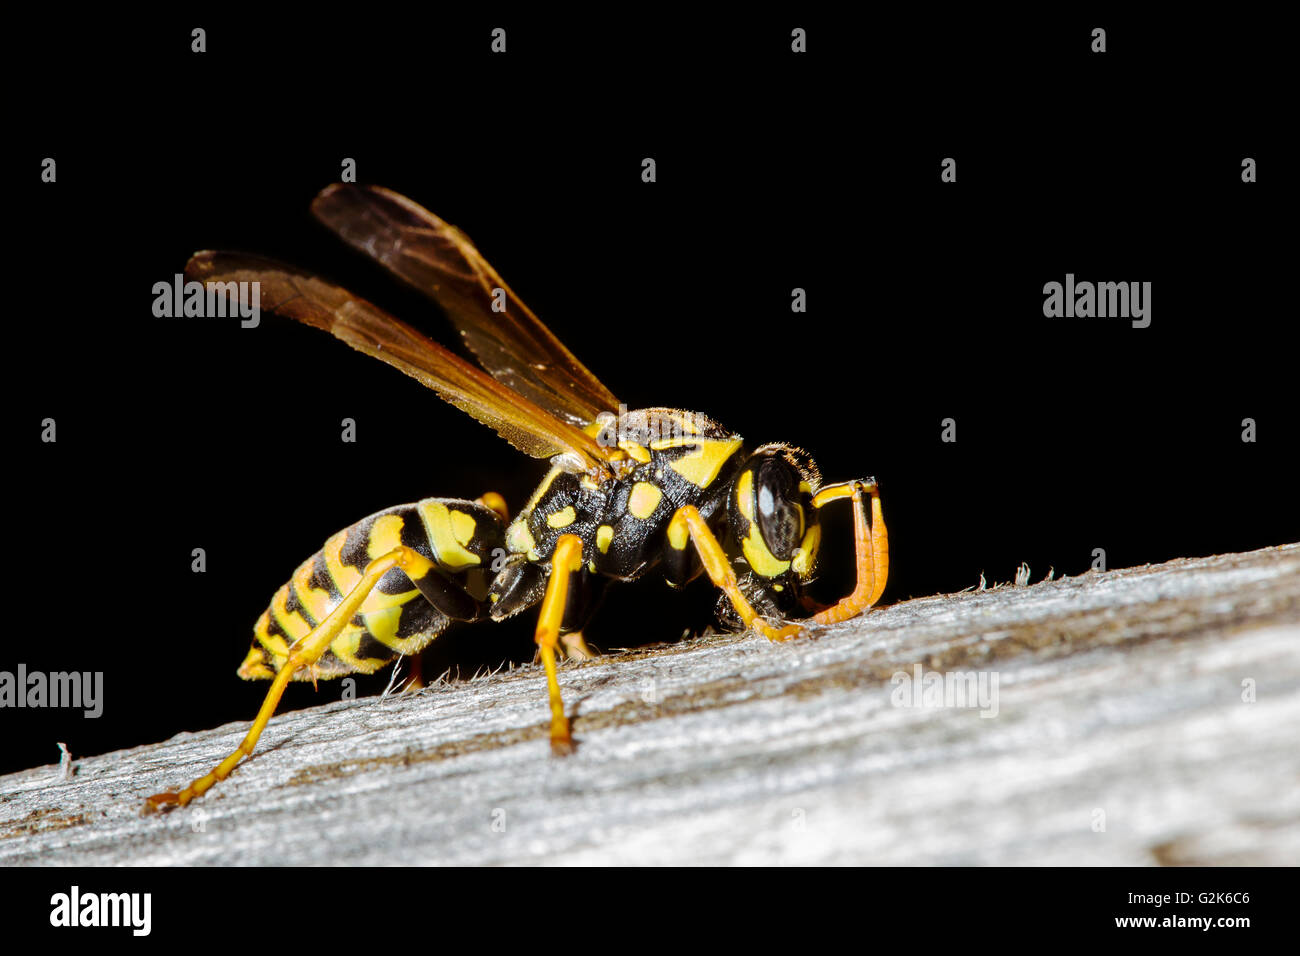 Macro shot of a wasp resting on wooden surface Stock Photo